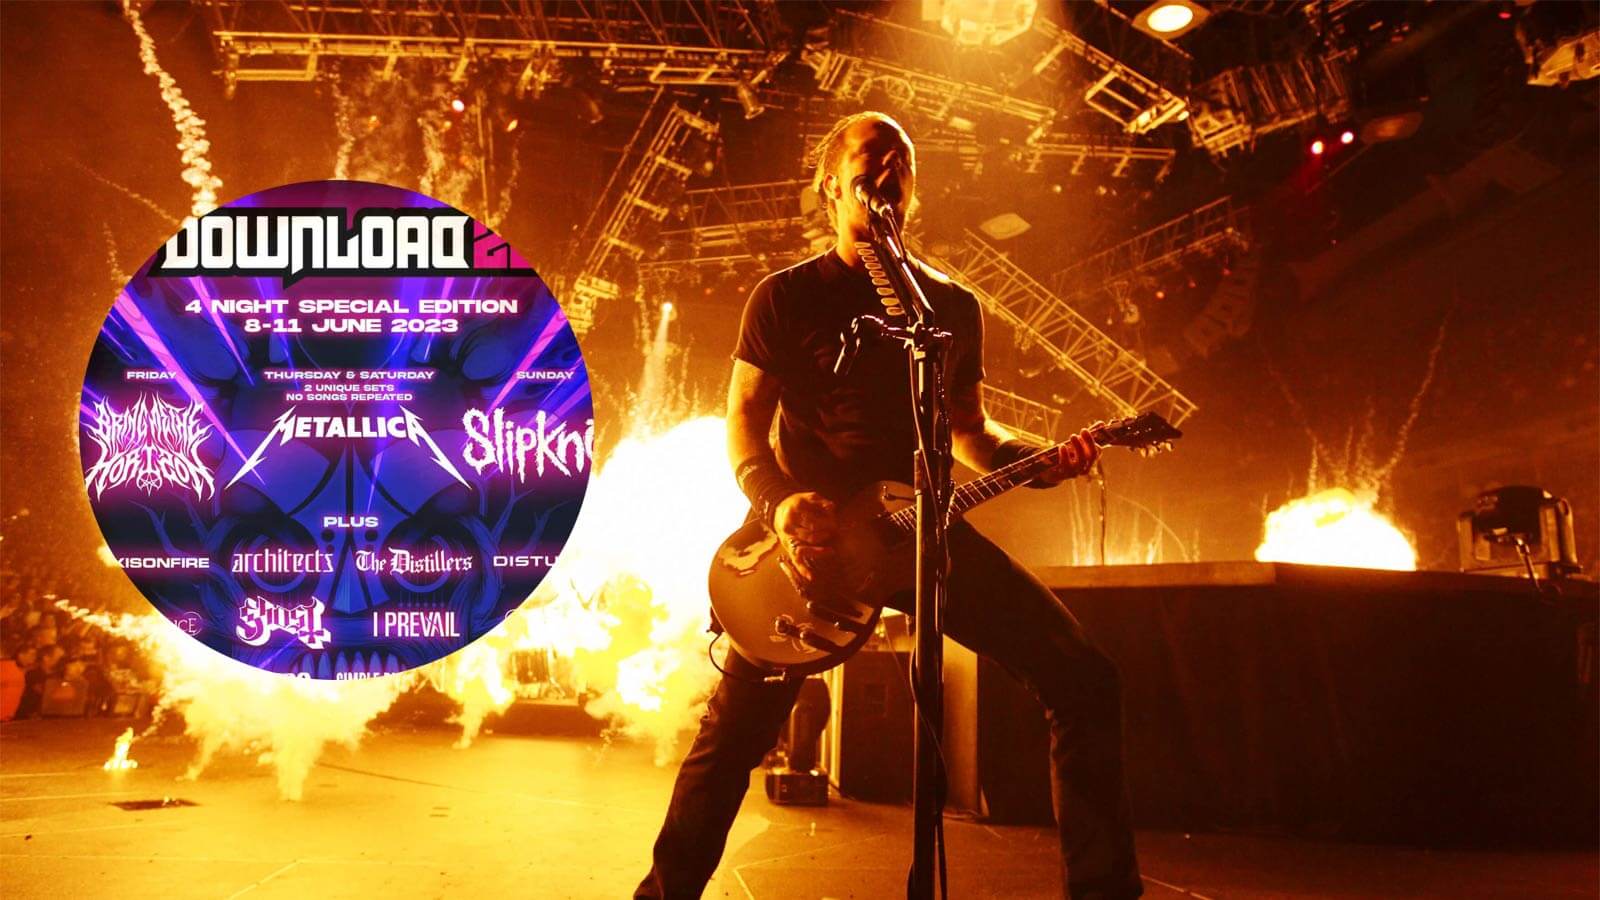 Download Festival 2023 Reveals Huge Lineup with Metallica, Slipknot and More